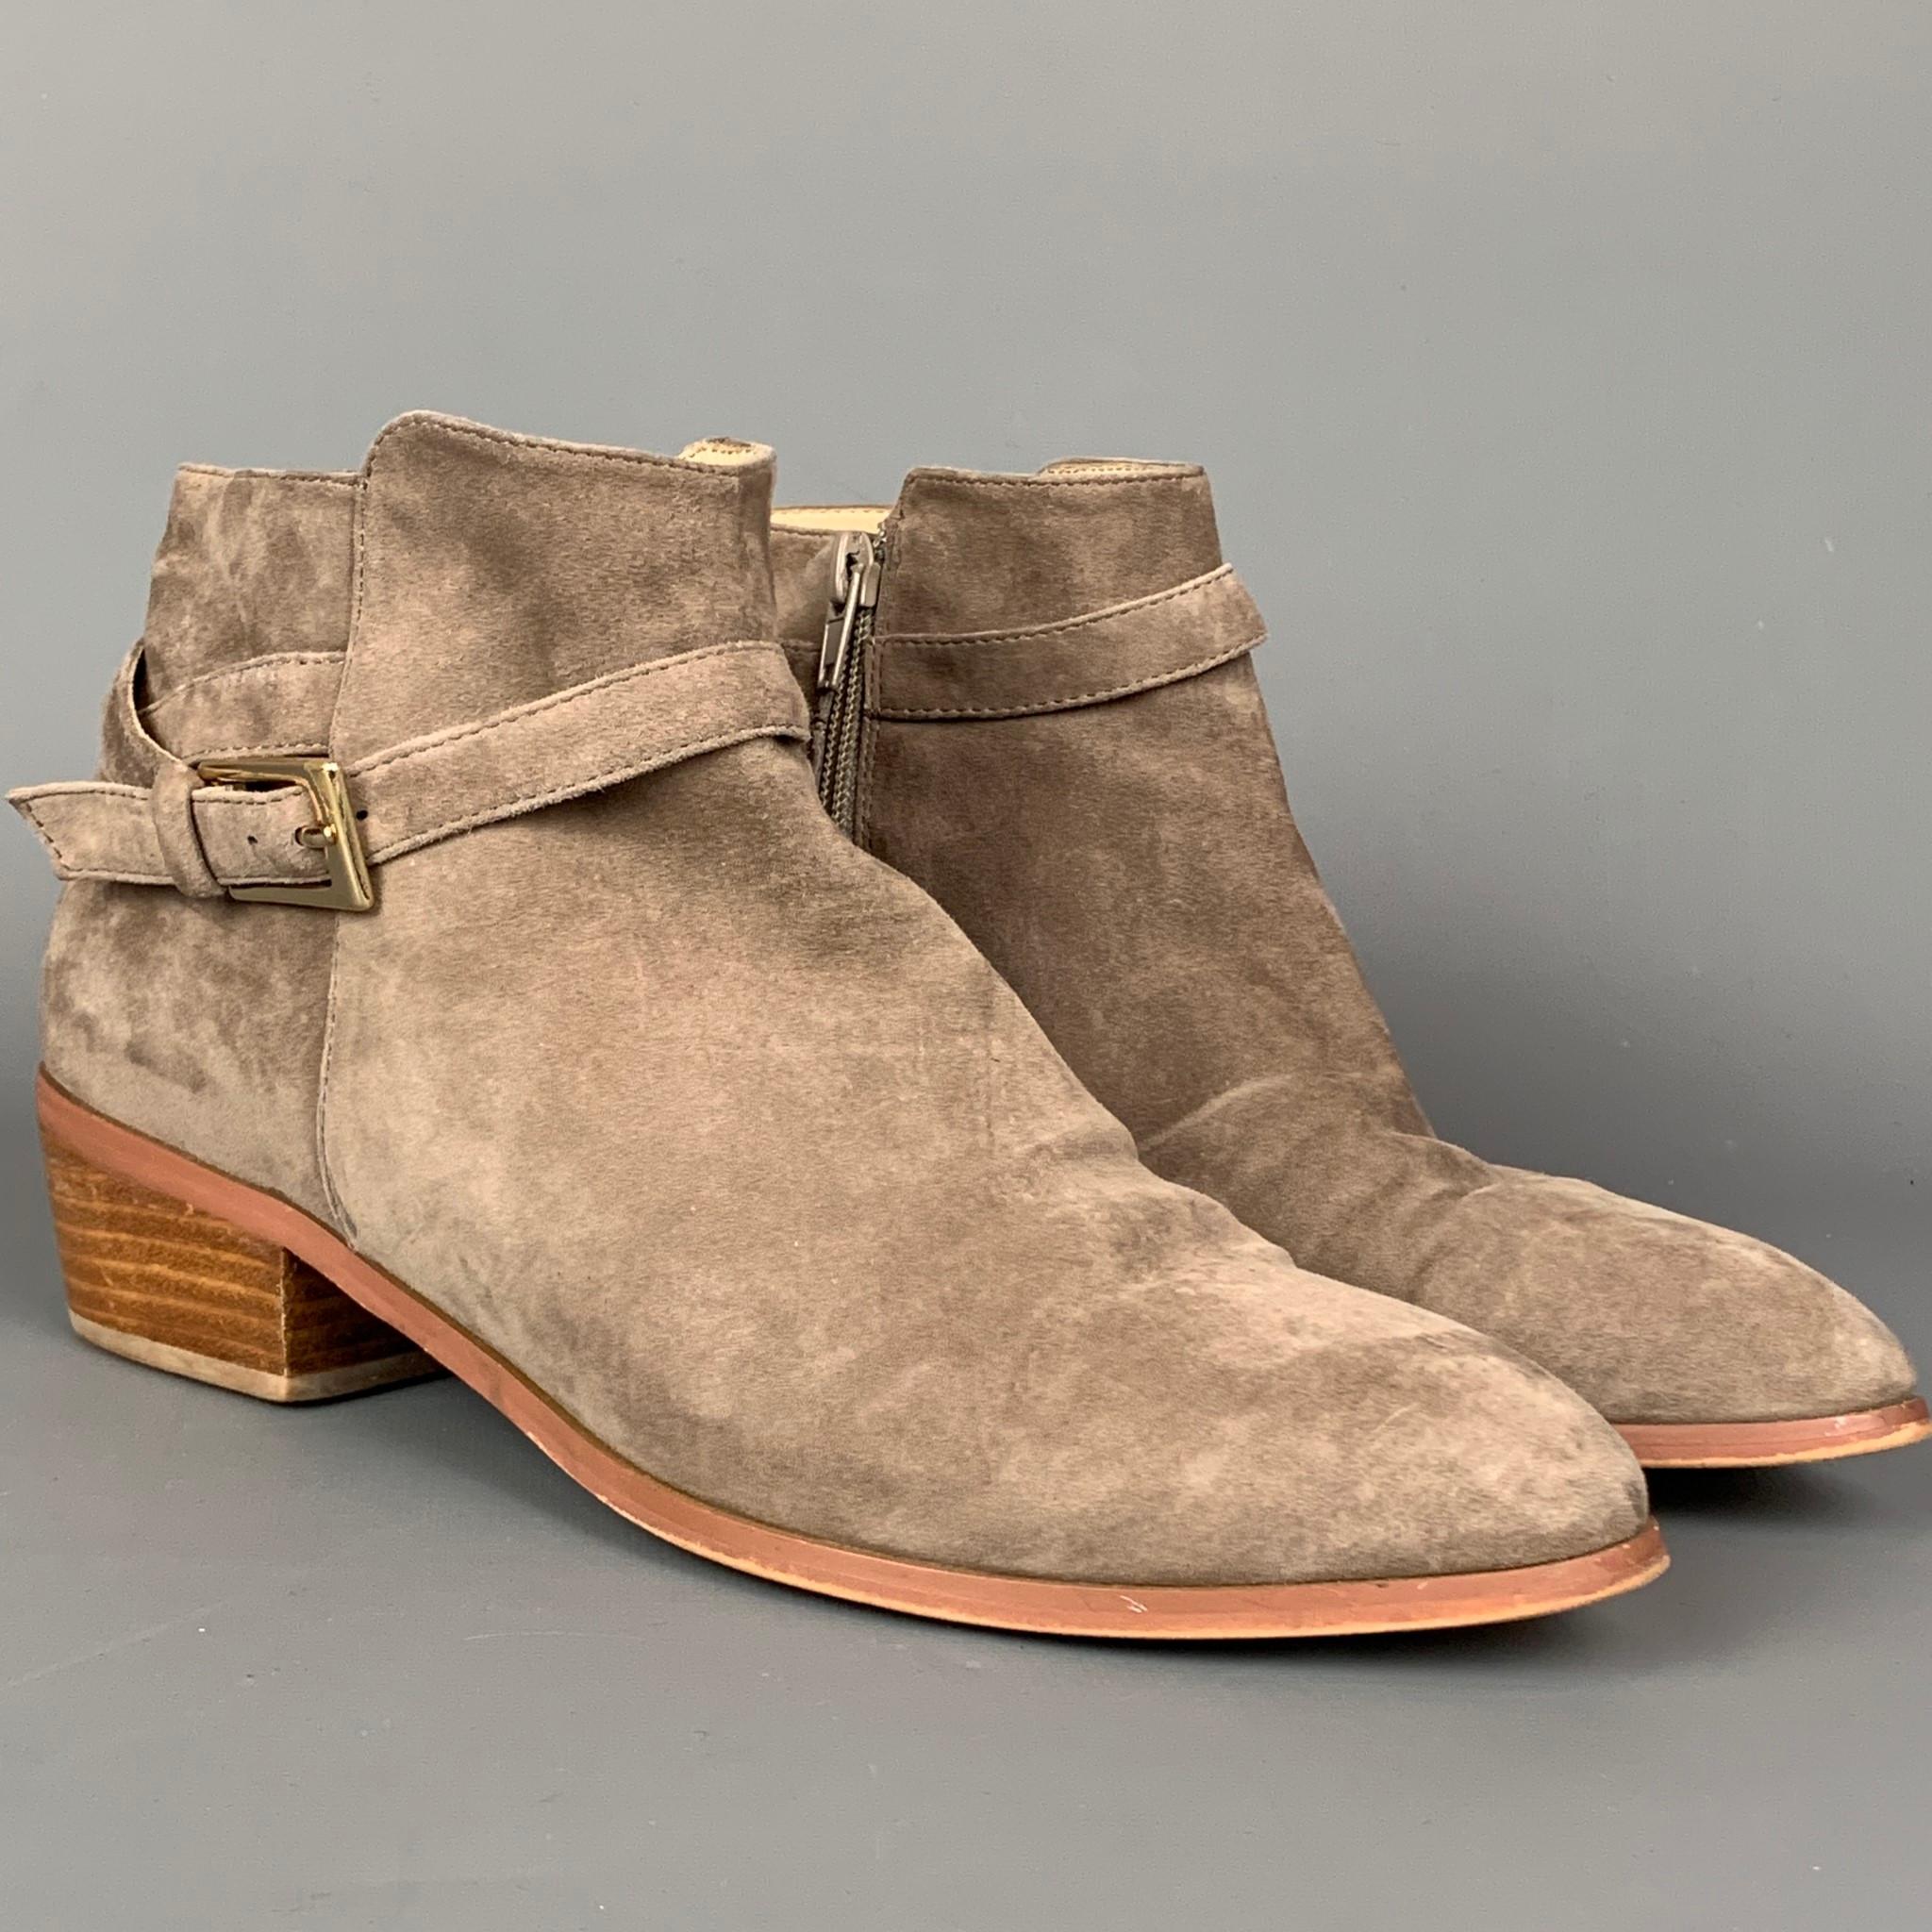 BARNEY'S NEW YORK ankle boots comes in a taupe suede featuring ankle straps, gold tone buckle, wooden sole, anda chunky heel. 

Good Pre-Owned Condition. Minor wear on heel.
Marked: 9

Measurements:

Heel: 1.5 in. 

SKU: 109991
Category: Boots

More